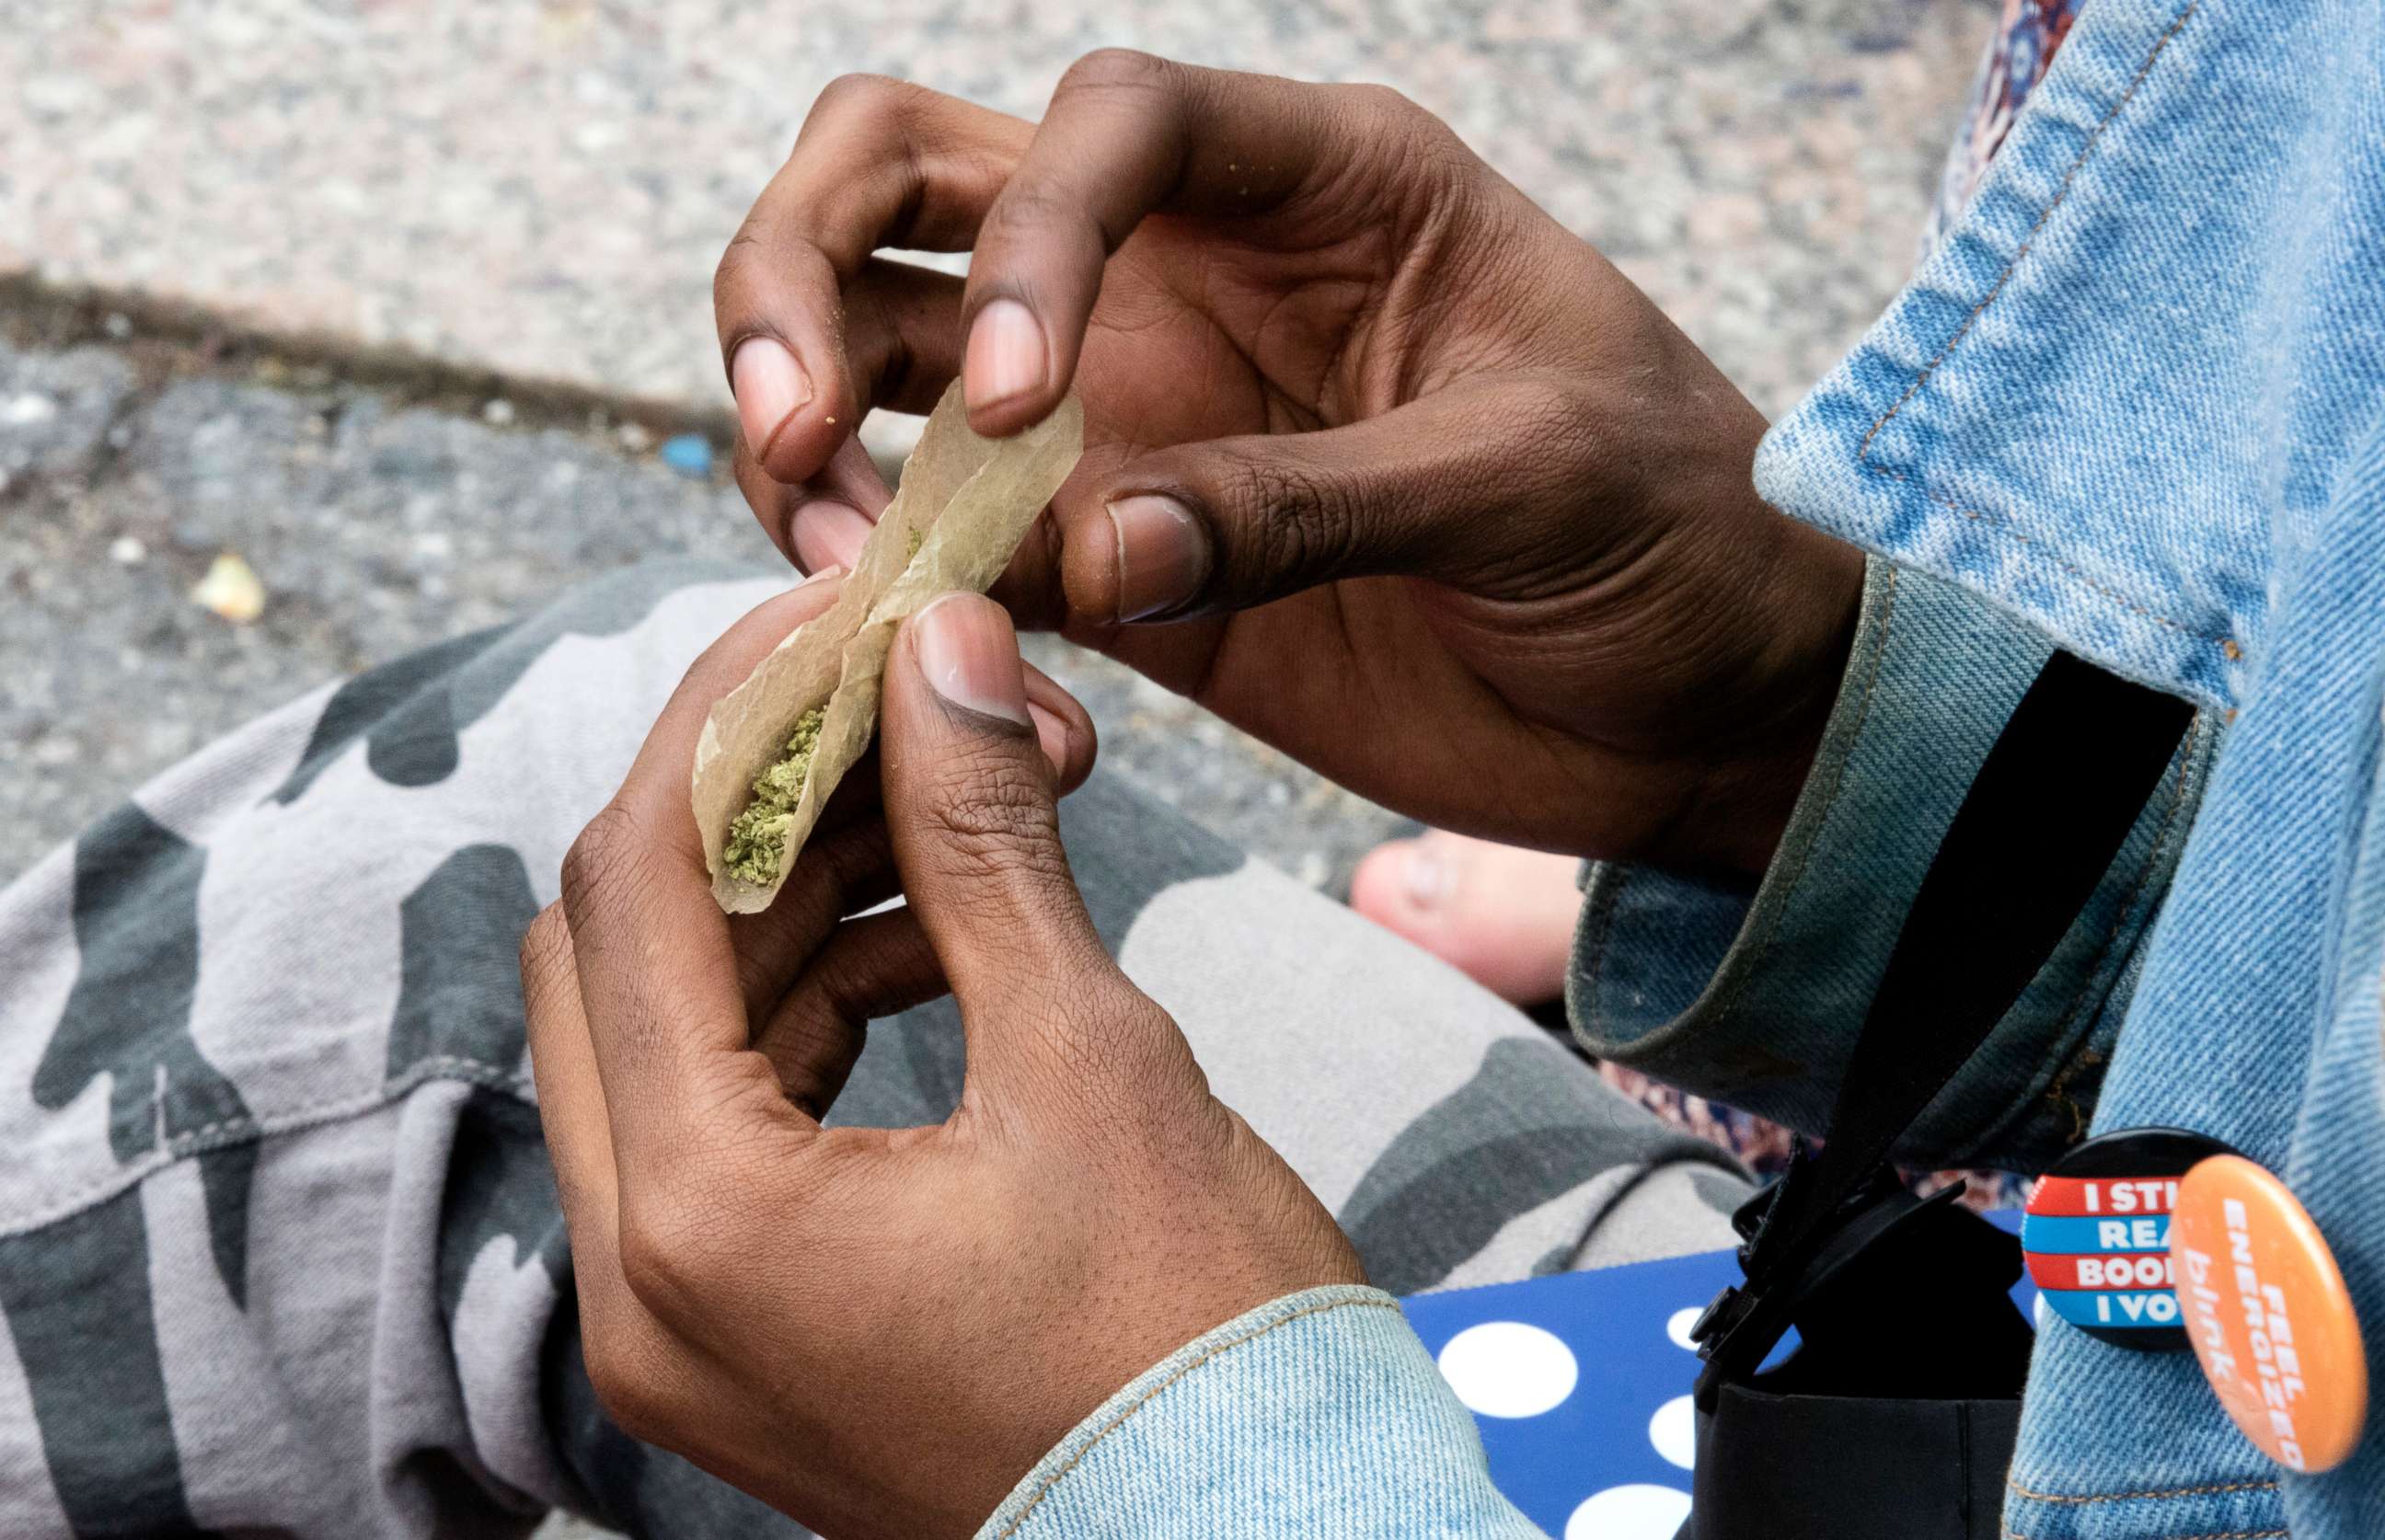 PHOTO: A man rolls cannabis during the annual NYC Cannabis Parade & Rally in support of the legalization of marijuana for recreational and medical use at Union Square, May 7, 2016, in New York City.